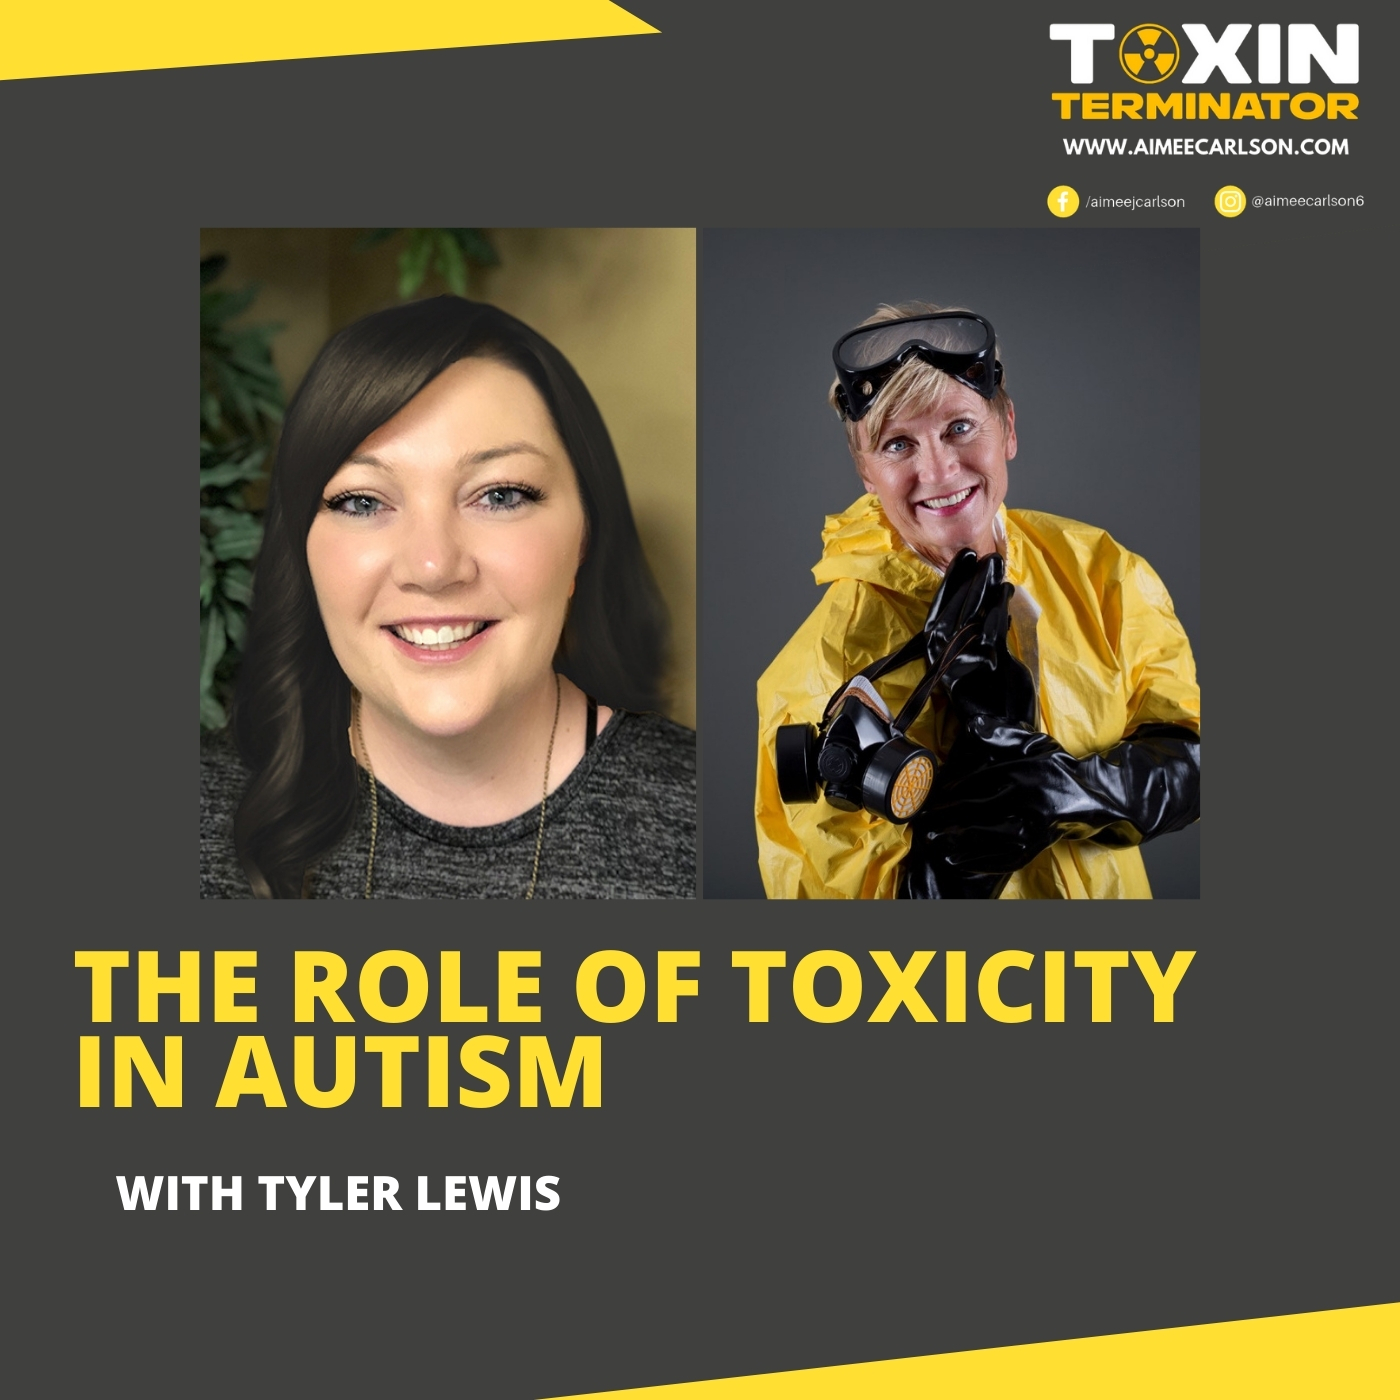 The Role of Toxicity in Autism with Tyler Lewis